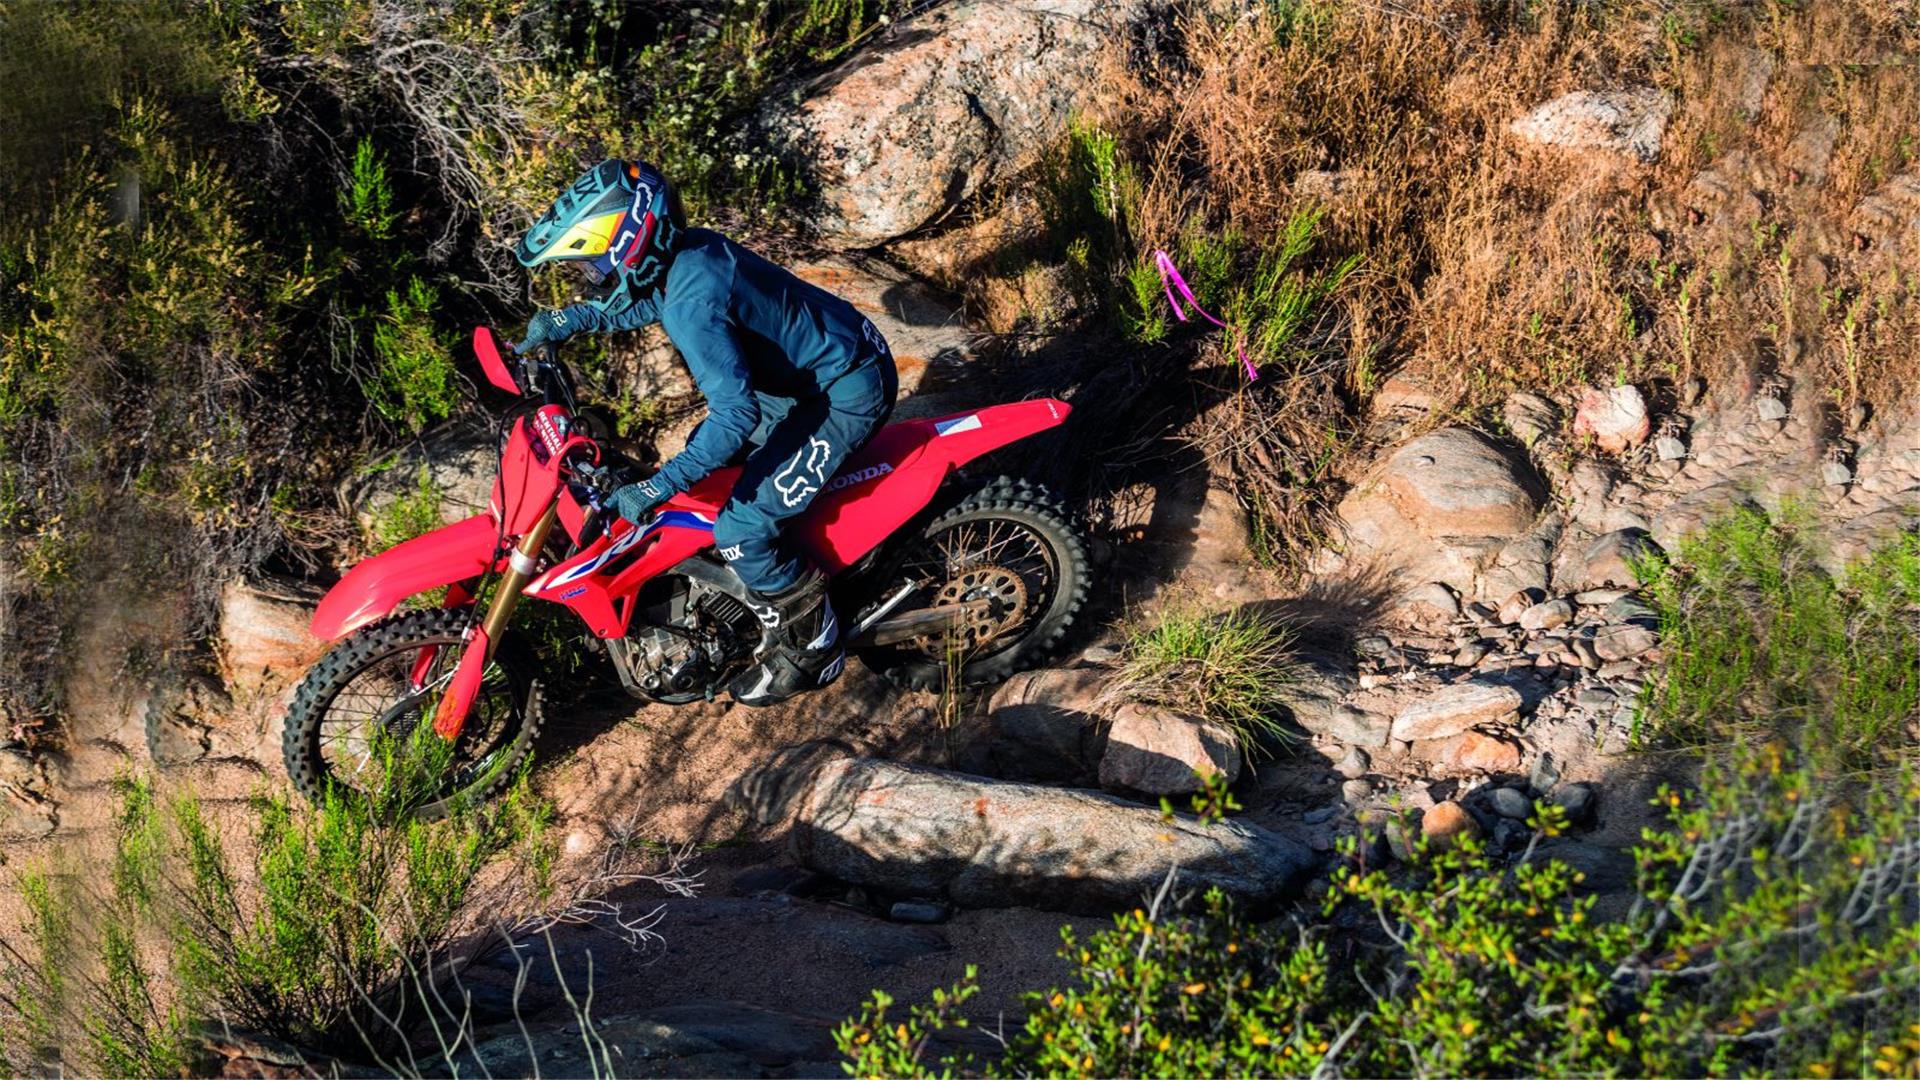 CRF 450RX. READY FOR WHATEVER YOU'VE GOT.